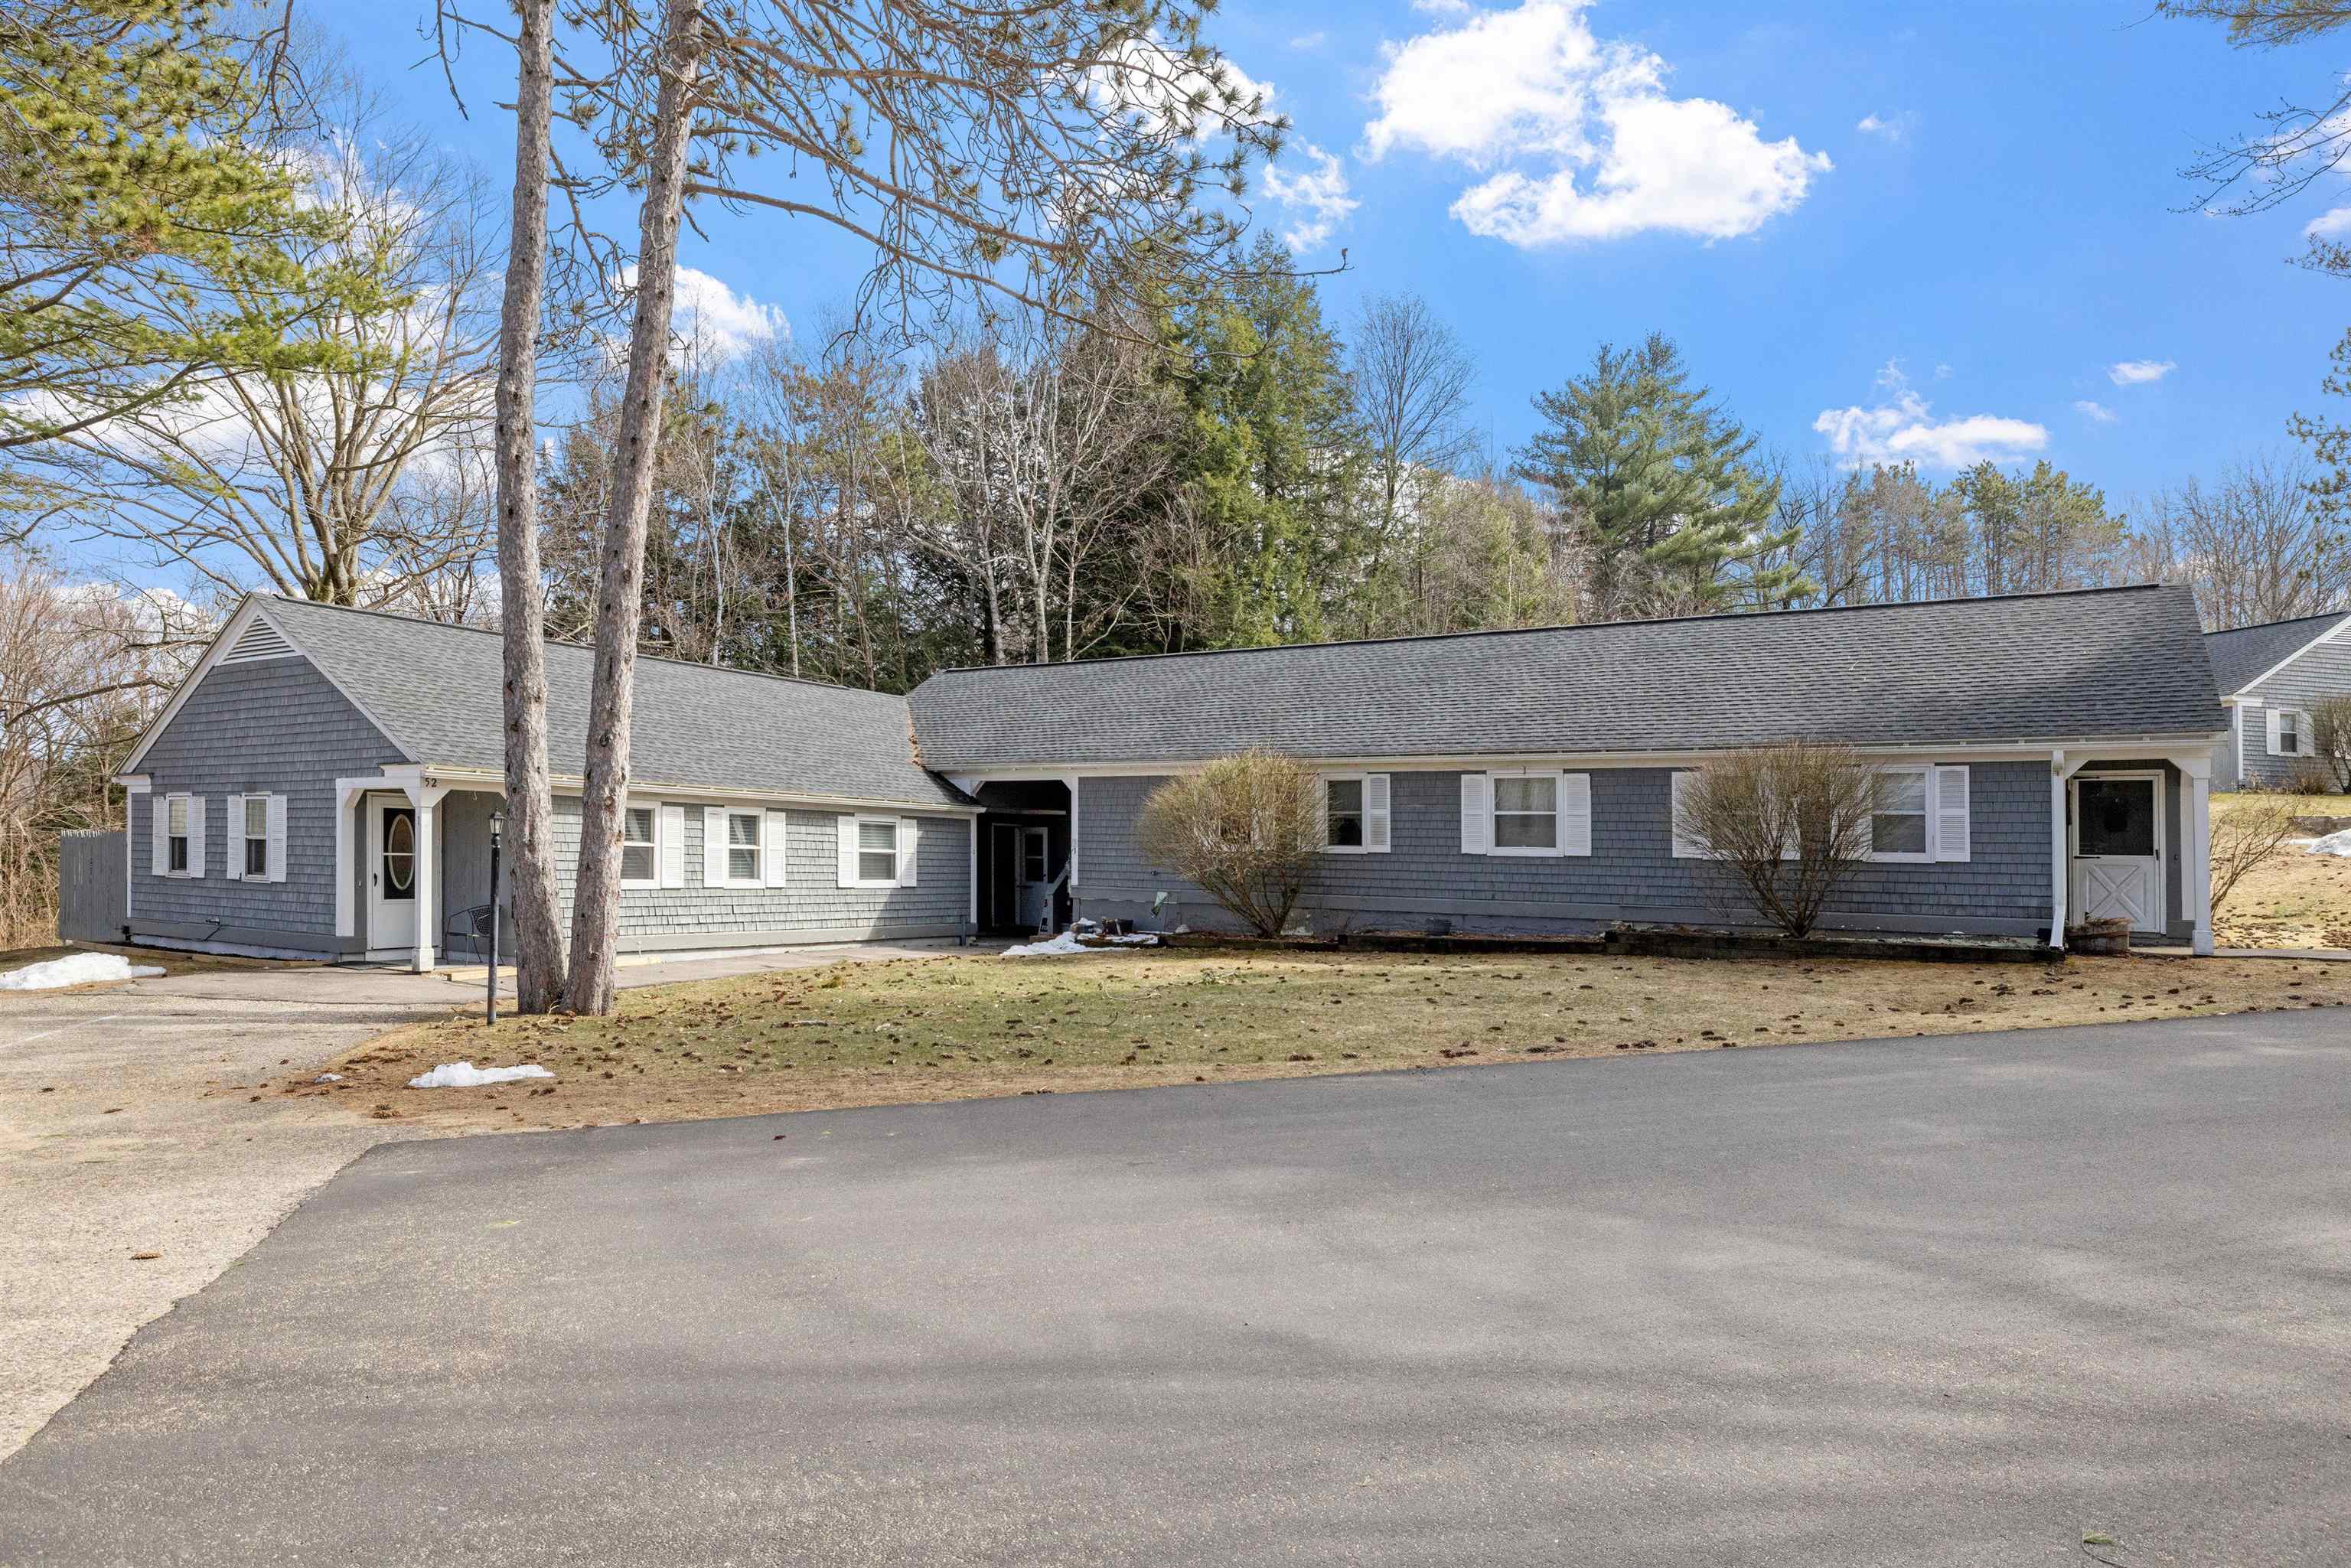 52 Orchard Hill Road1  Belmont, NH Photo